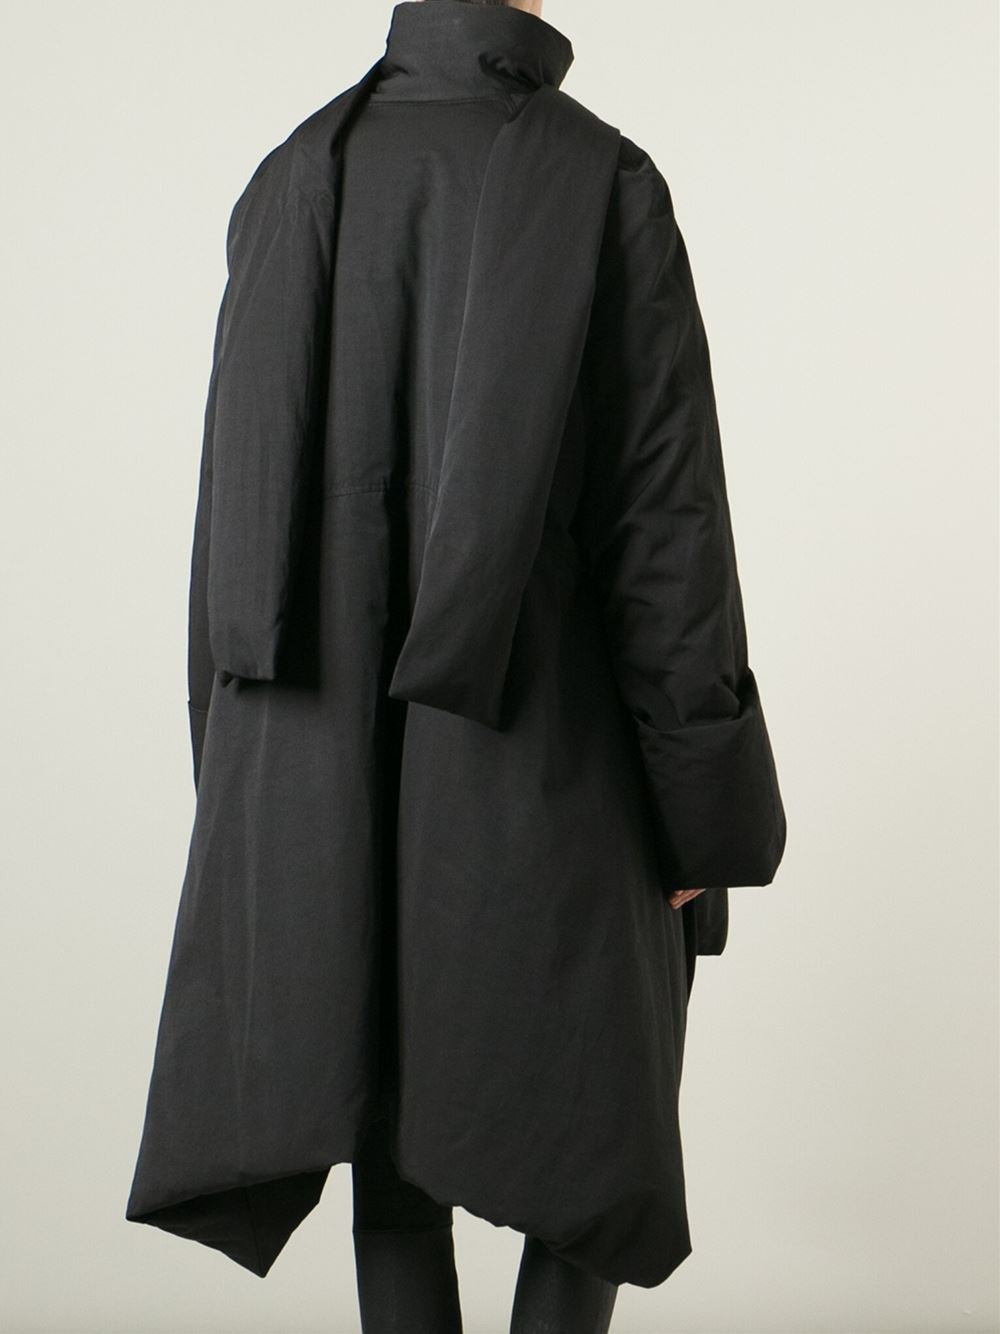 Rick owens Oversize Padded Coat in Black | Lyst